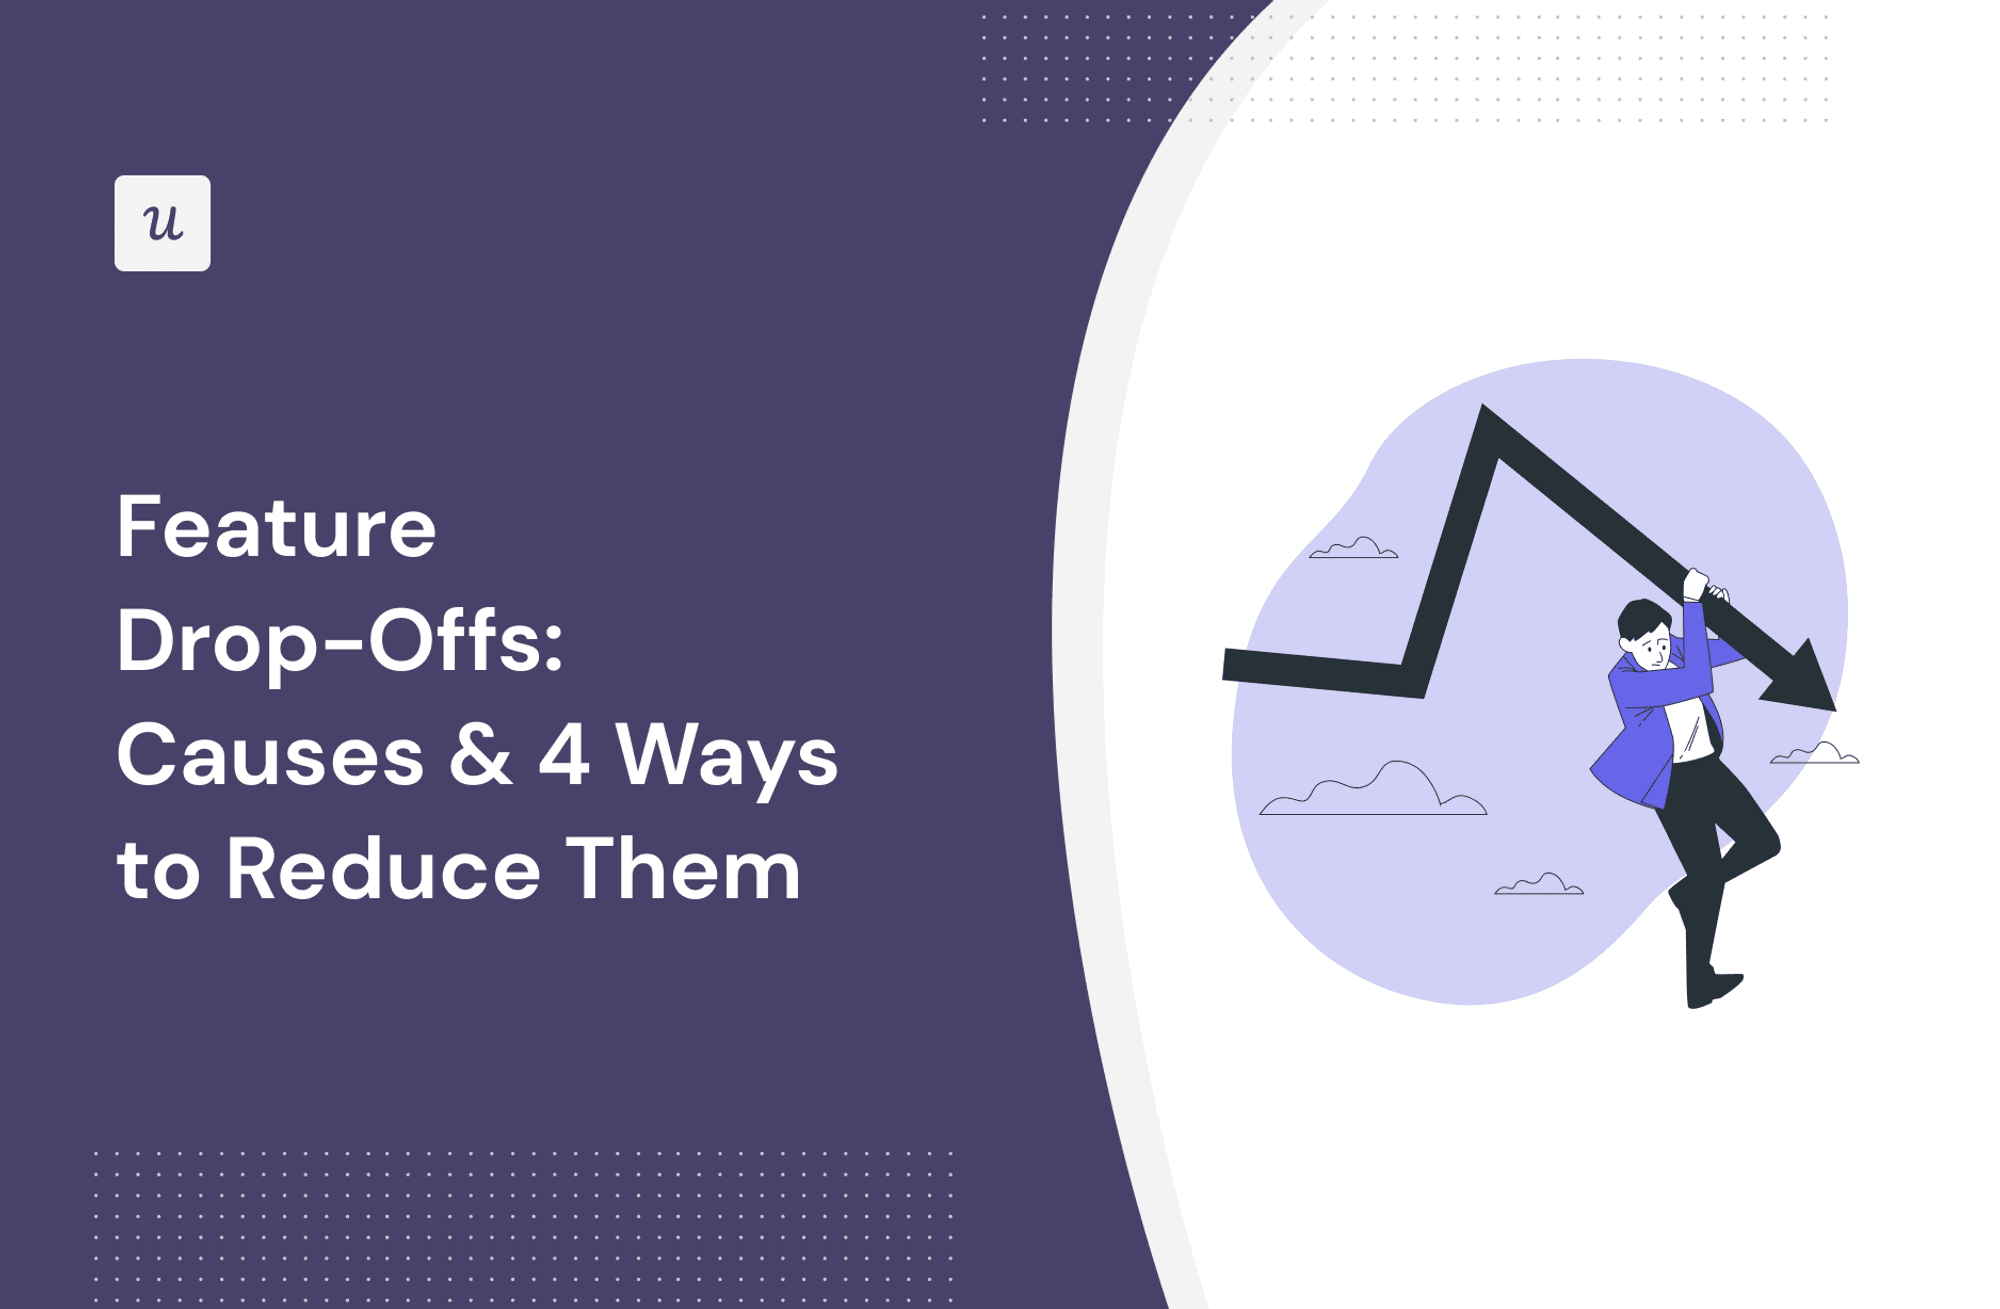 Feature Drop-Offs: Causes & 4 Ways to Reduce Them cover